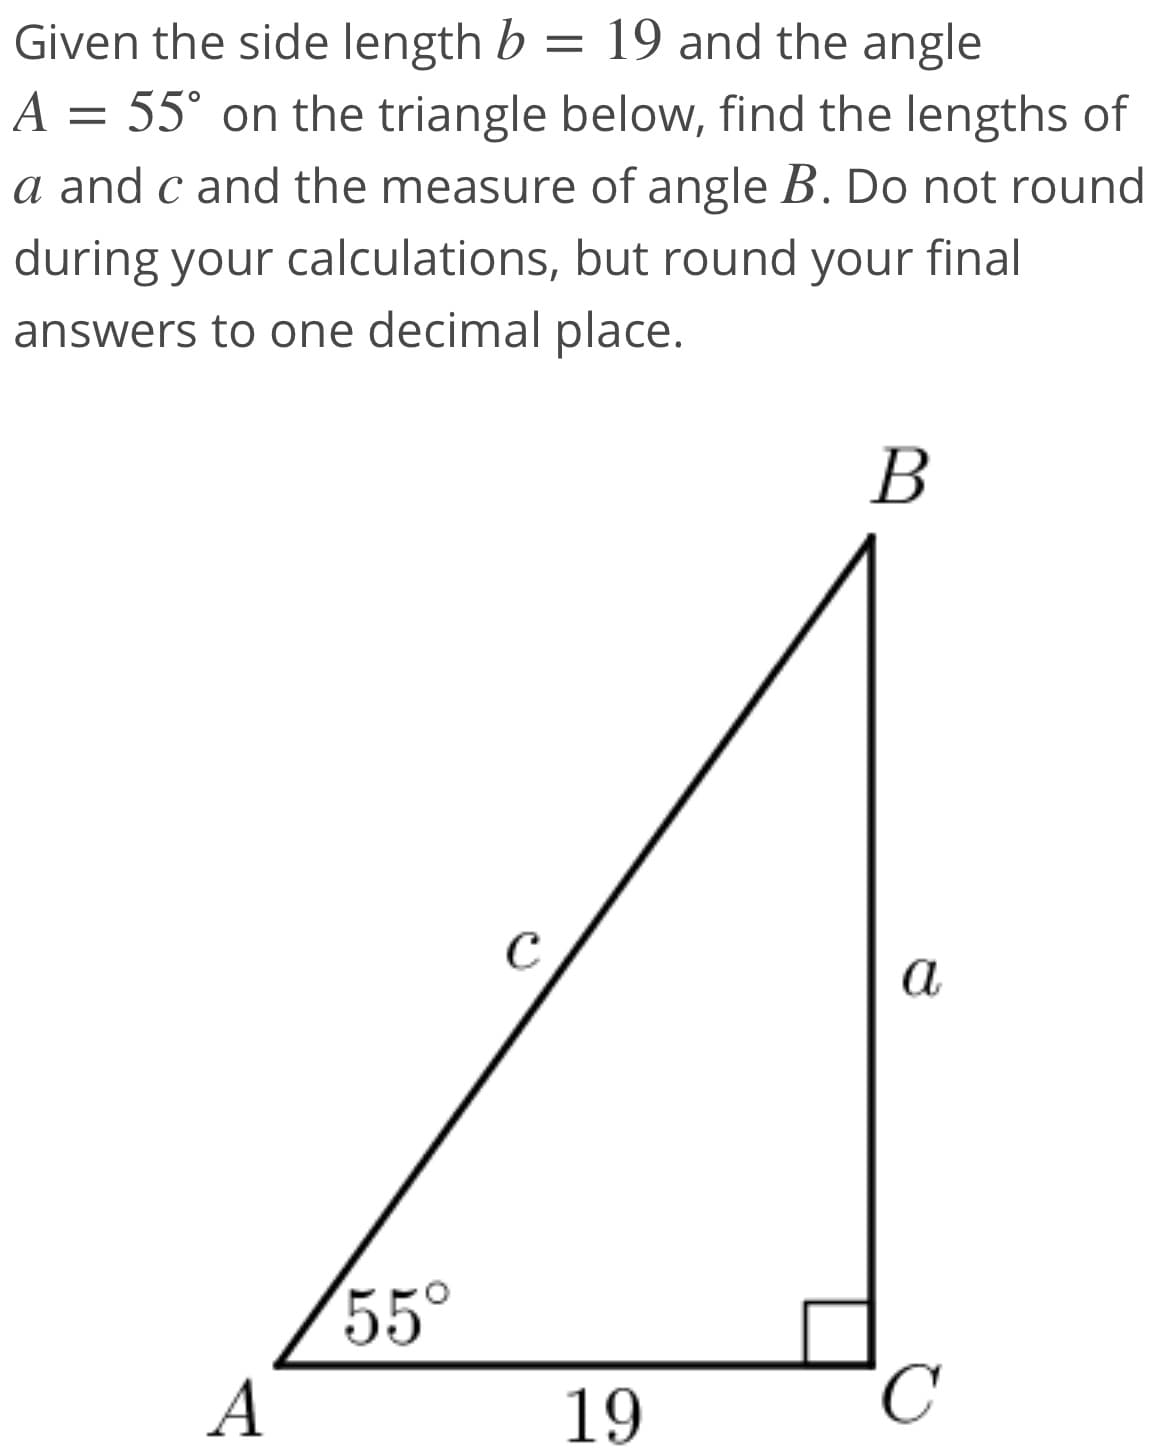 Given the side length b = 19 and the angle
A = 55° on the triangle below, find the lengths of
a and c and the measure of angle B. Do not round
during your calculations, but round your final
answers to one decimal place.
В
C
a
55°
A
19
